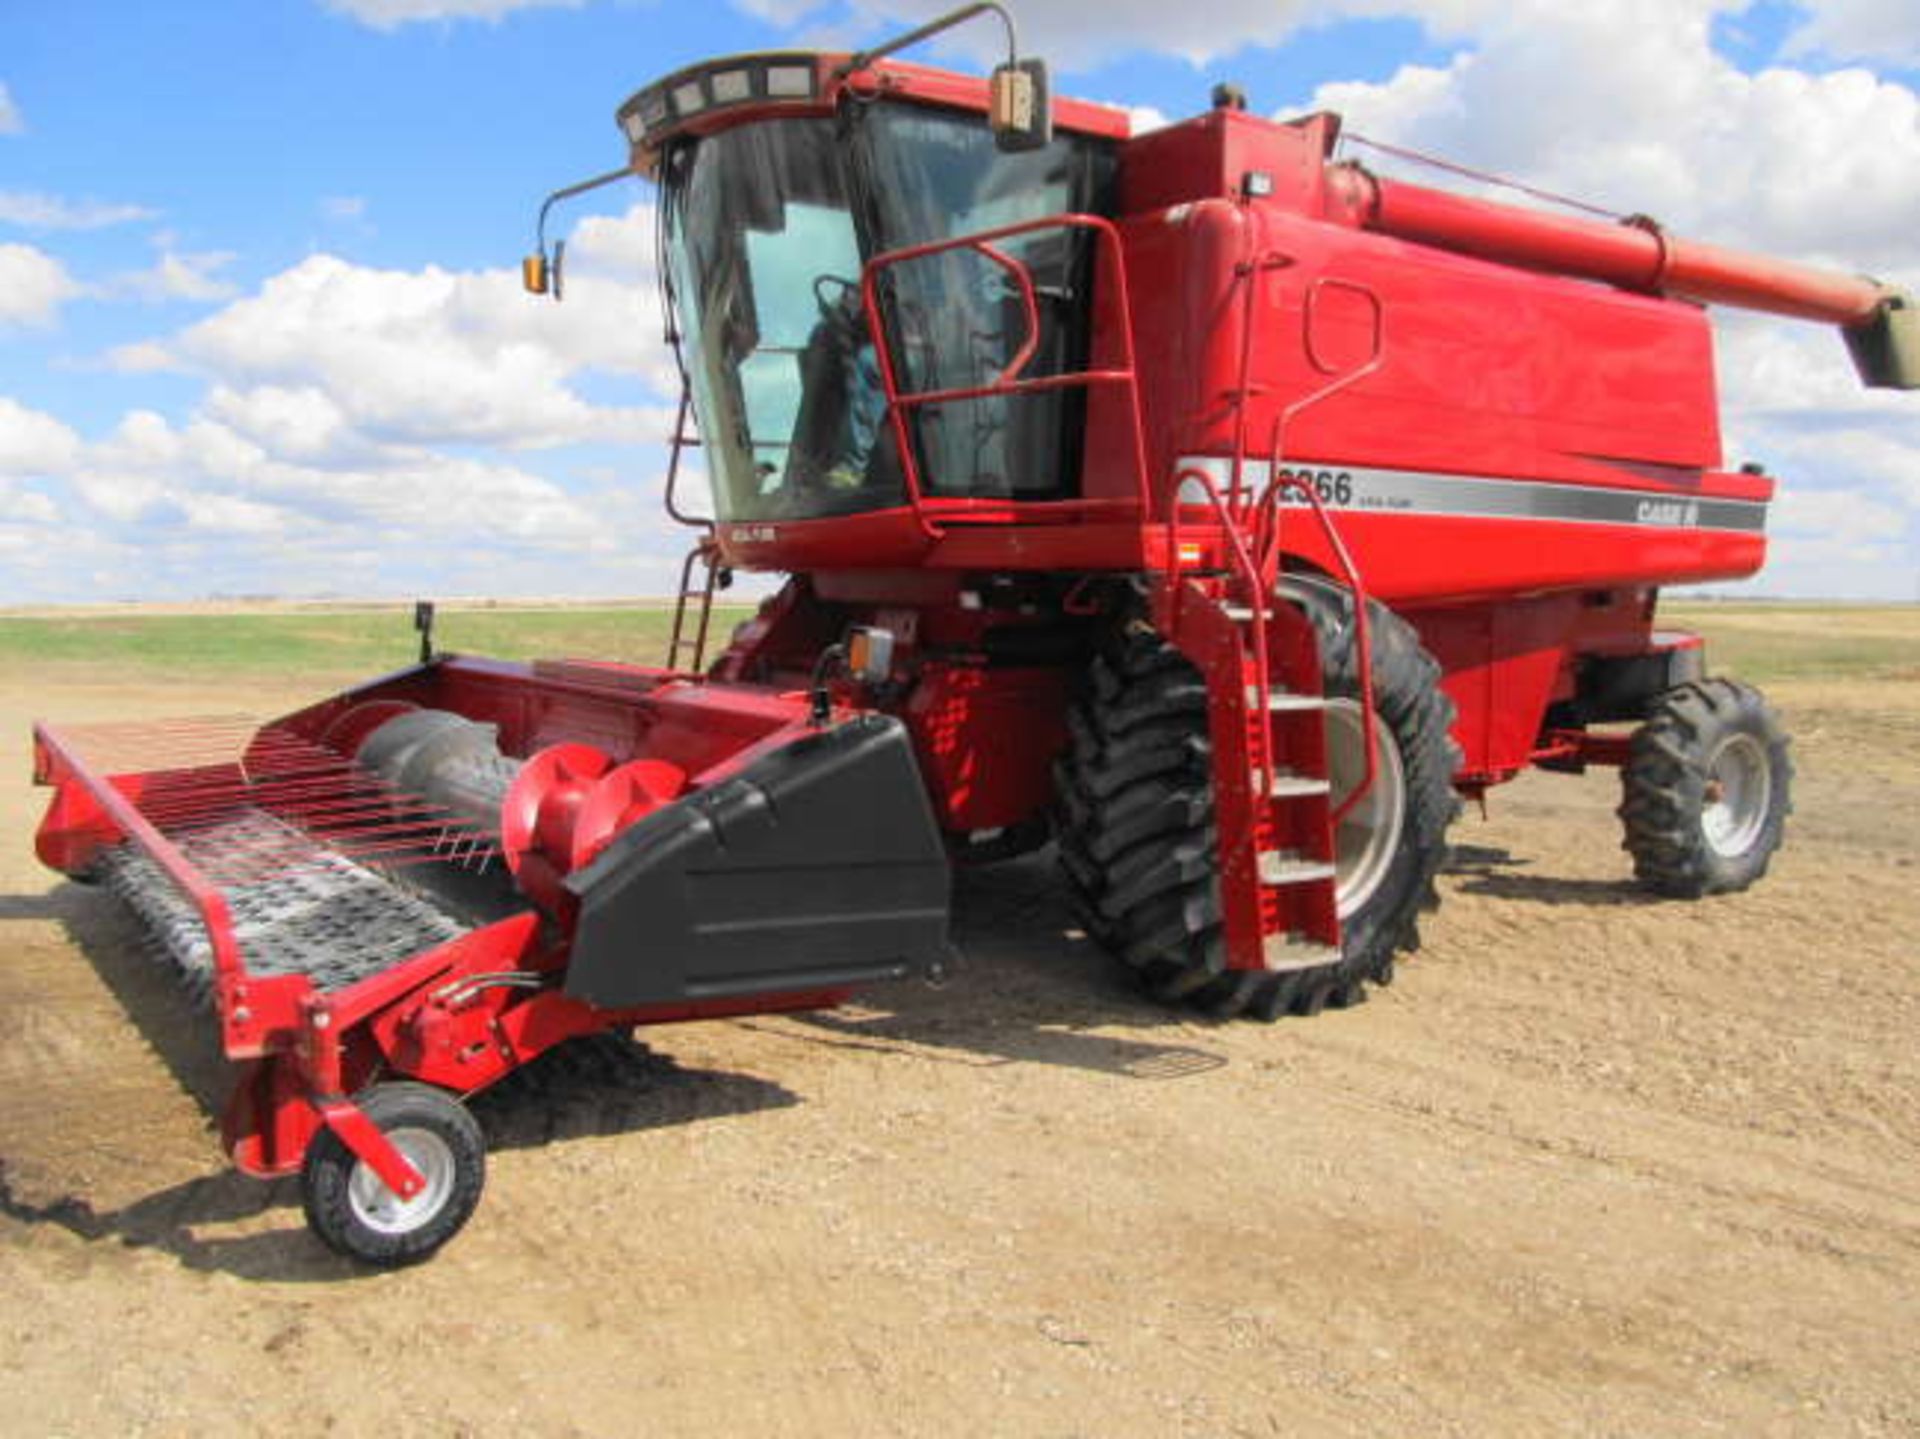 CASE IH 2366 AXIAL FLOW SP COMBINE; 987/1286 Rotor/Engine Hours, Case IH 1015 Pick-up Header, SN-